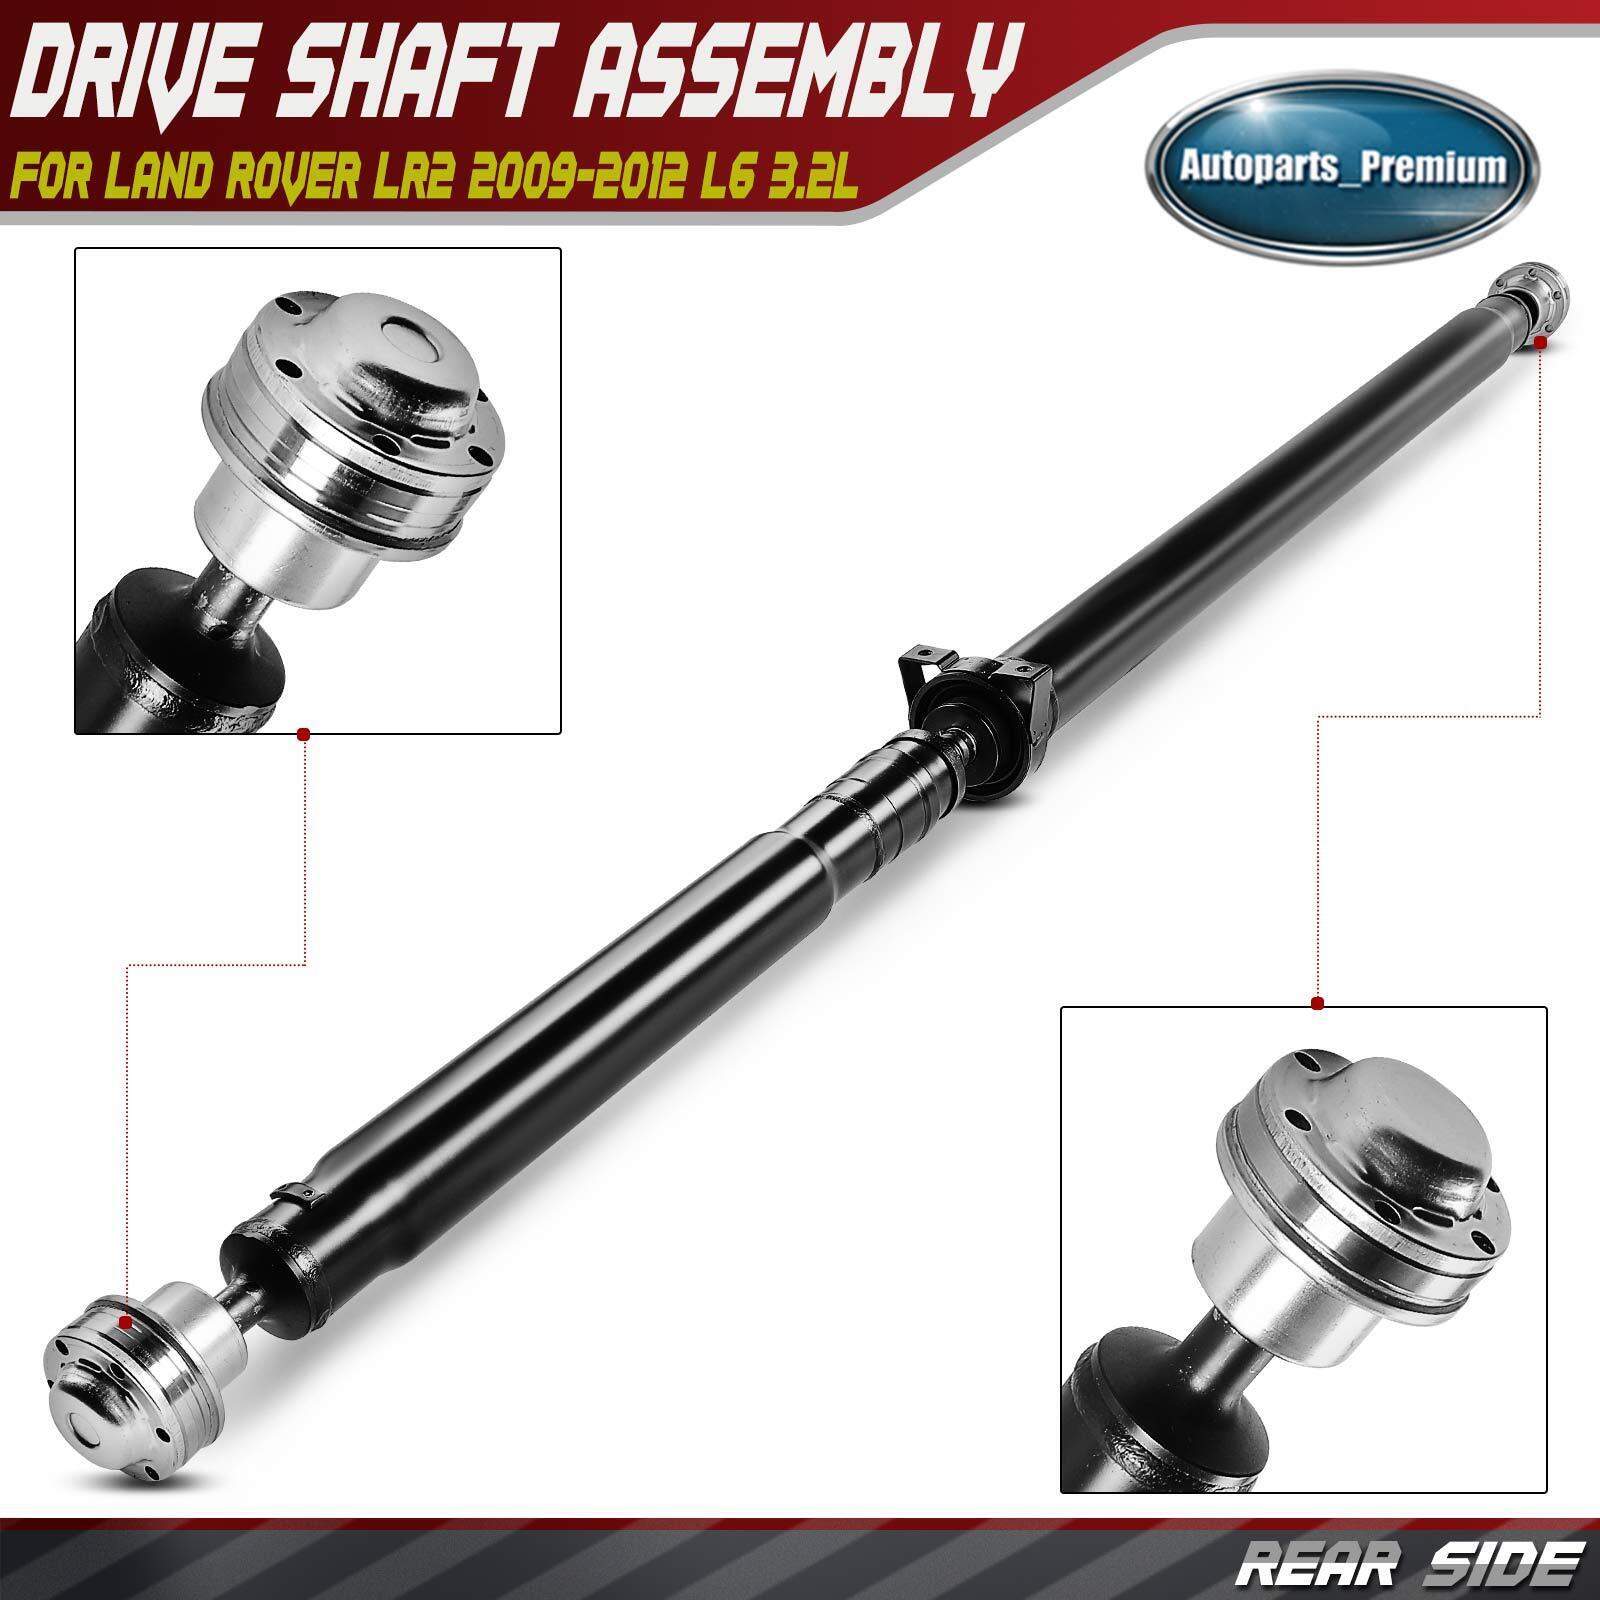 New Rear Driveshaft Prop Shaft Assembly for Land Rover LR2 2009-2012 L6 3.2L AWD